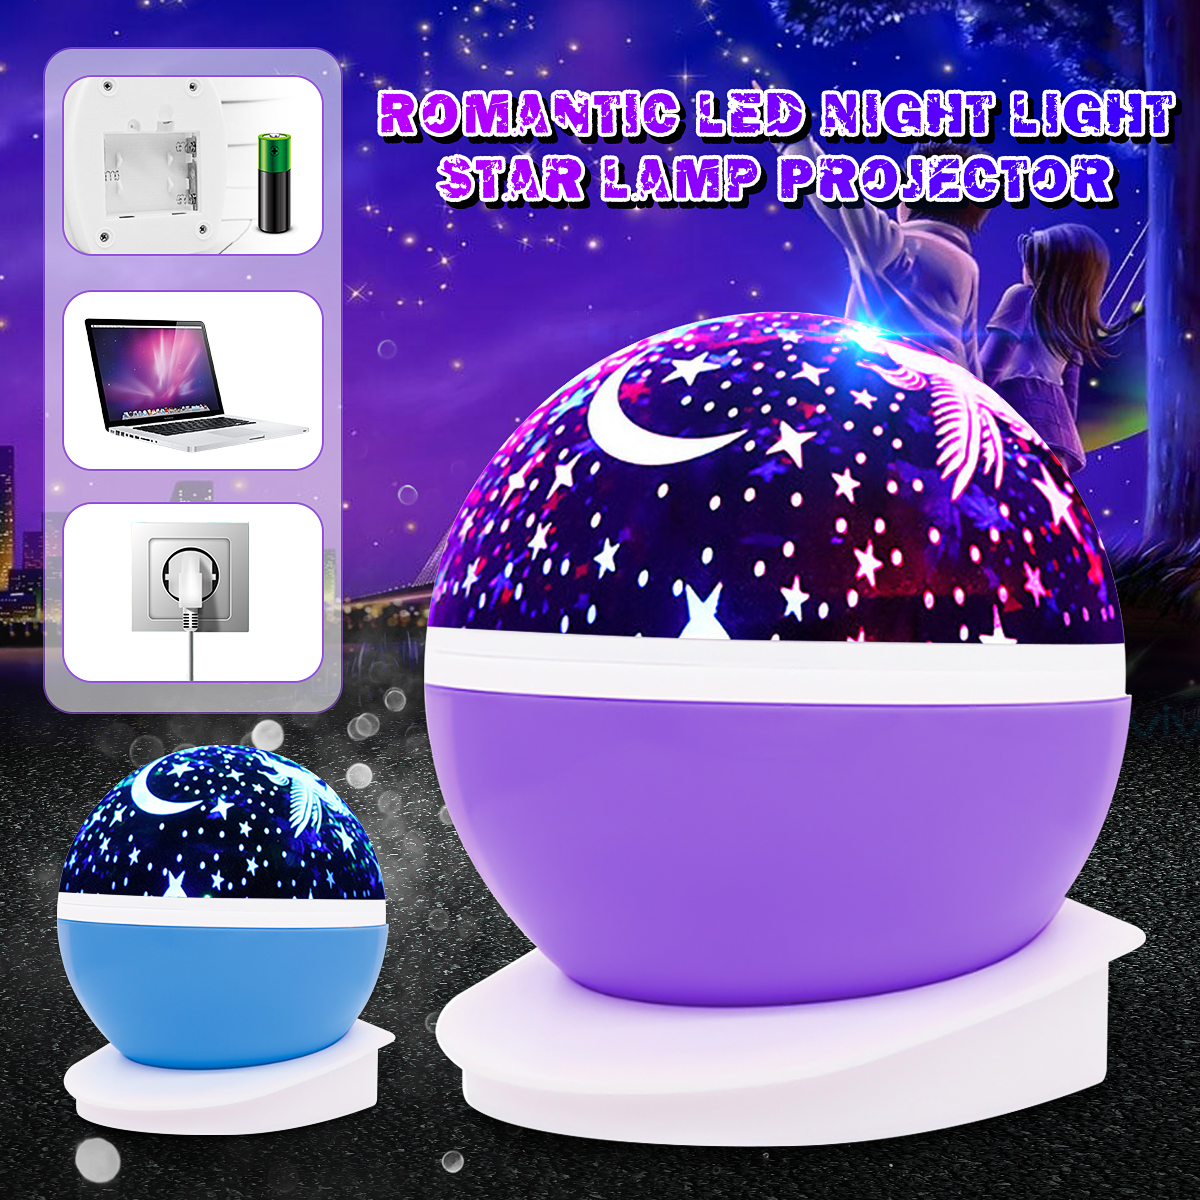 LED-Rotating-Night-Light-Projector-Starry-Sky-Star-Projection-Lamp-Childrens-Room-Decorated-Lights-1638181-1